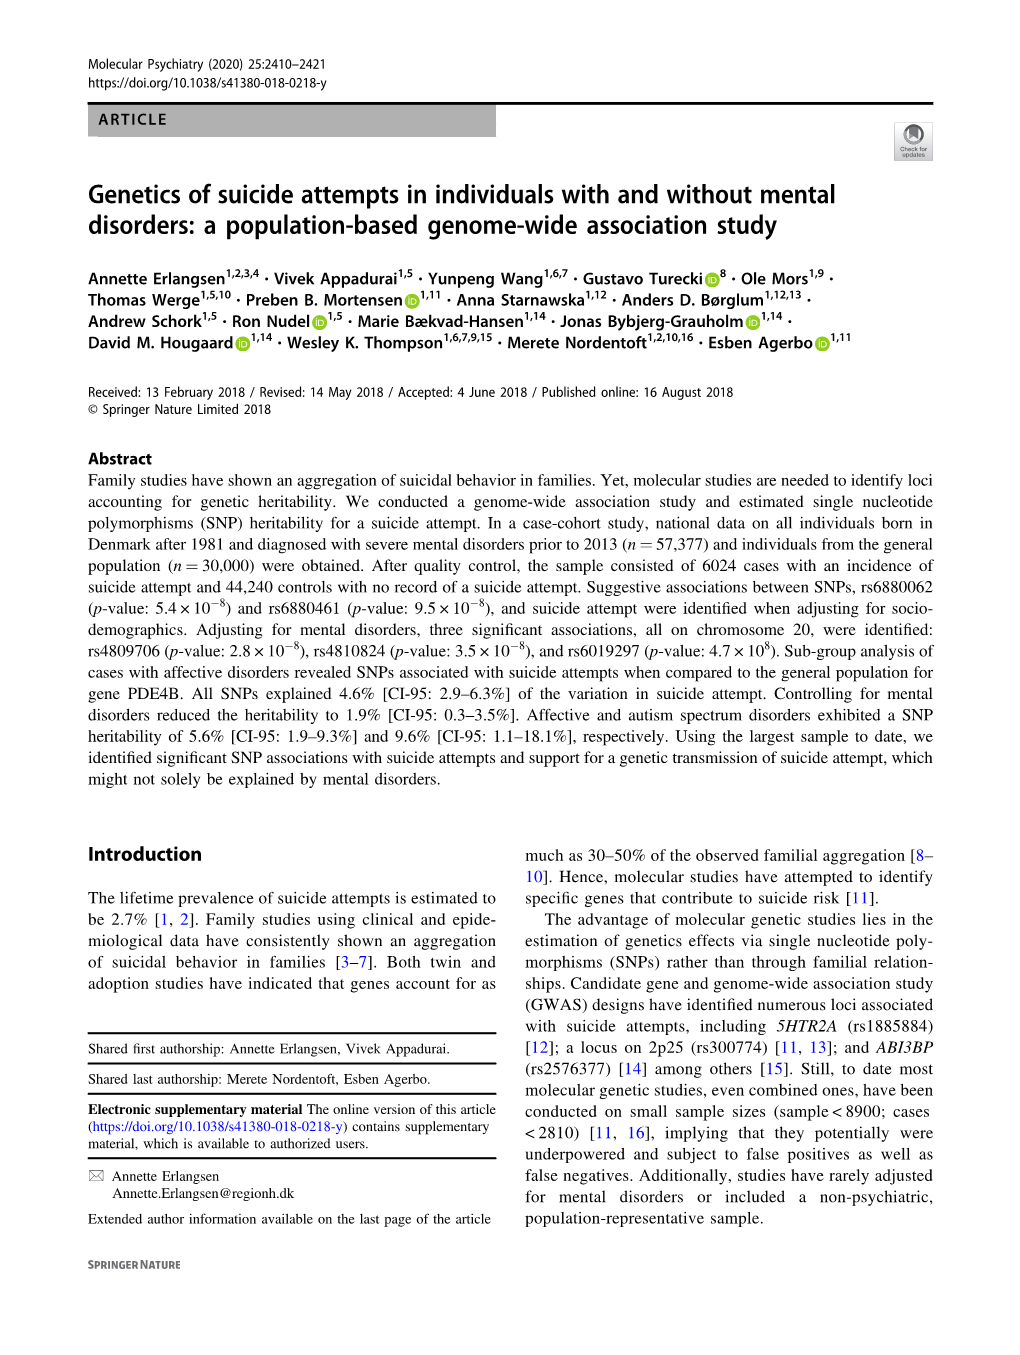 Genetics of Suicide Attempts in Individuals with and Without Mental Disorders: a Population-Based Genome-Wide Association Study